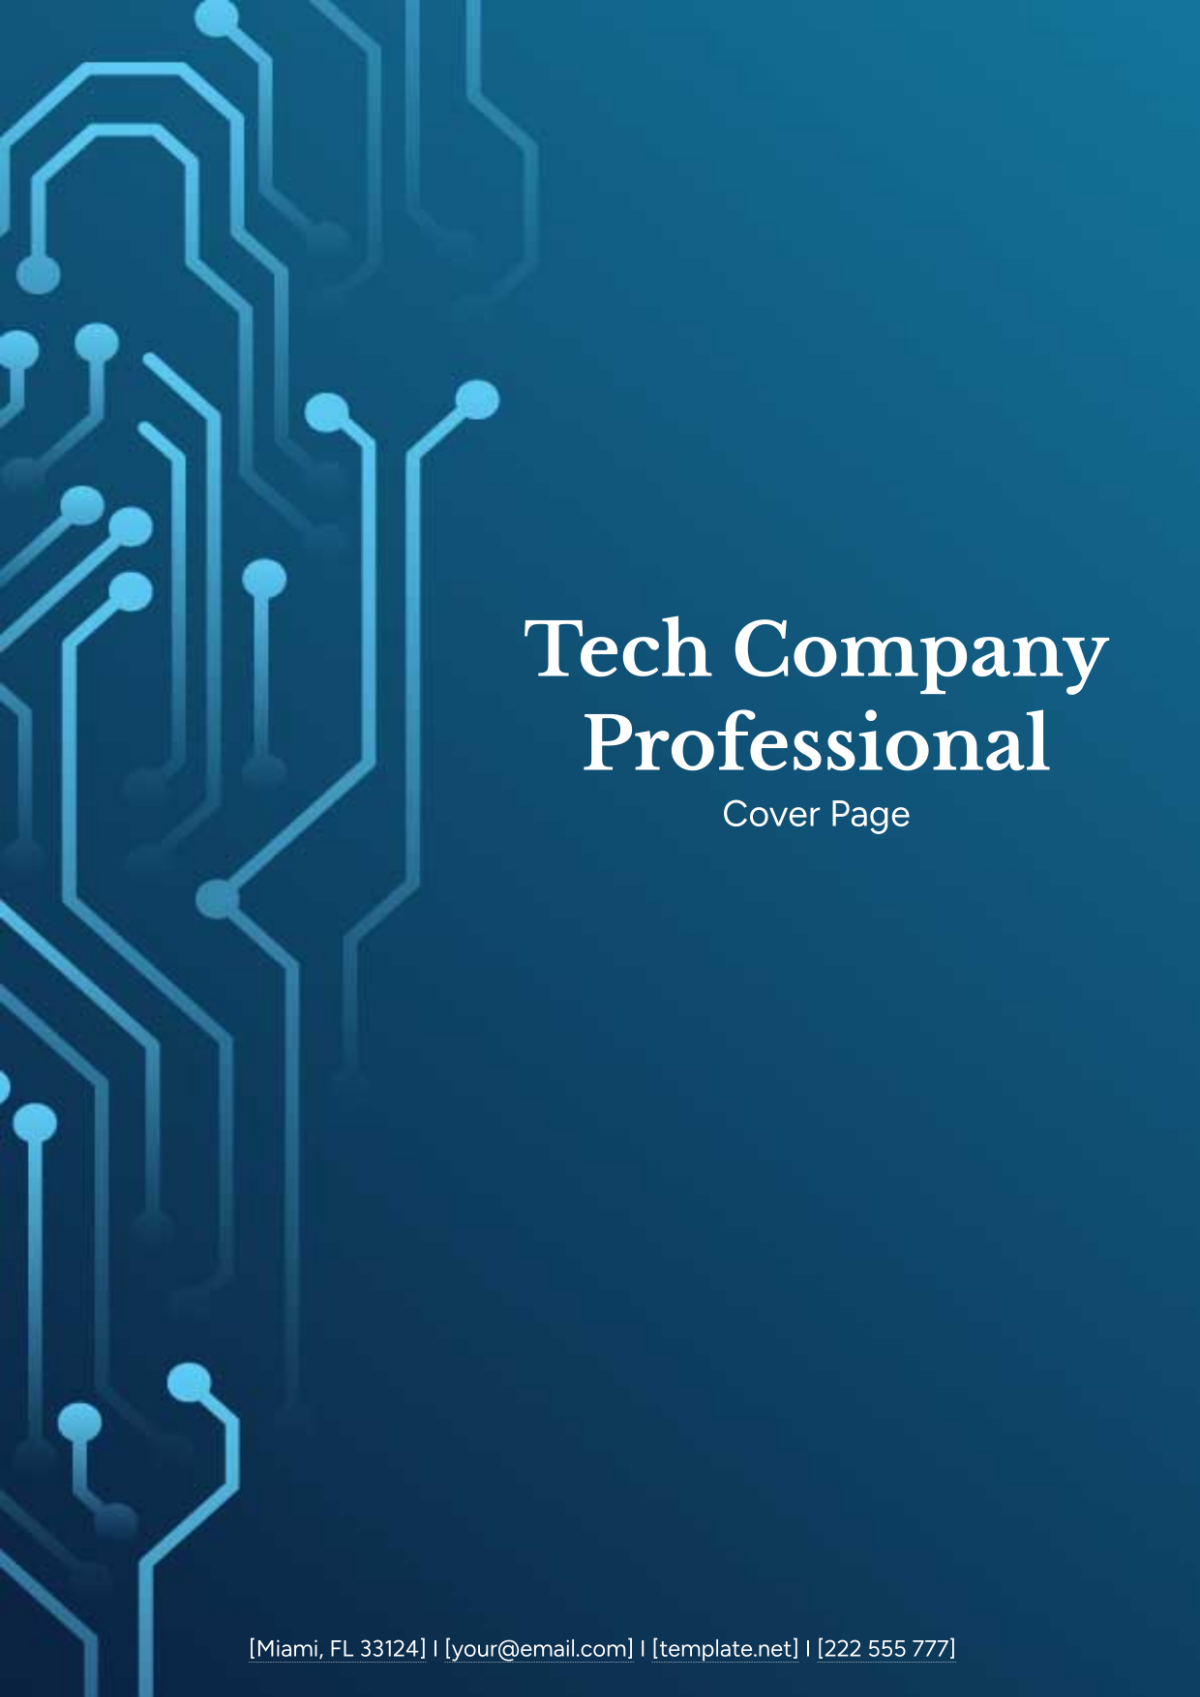 Tech Company Professional Cover Page Template